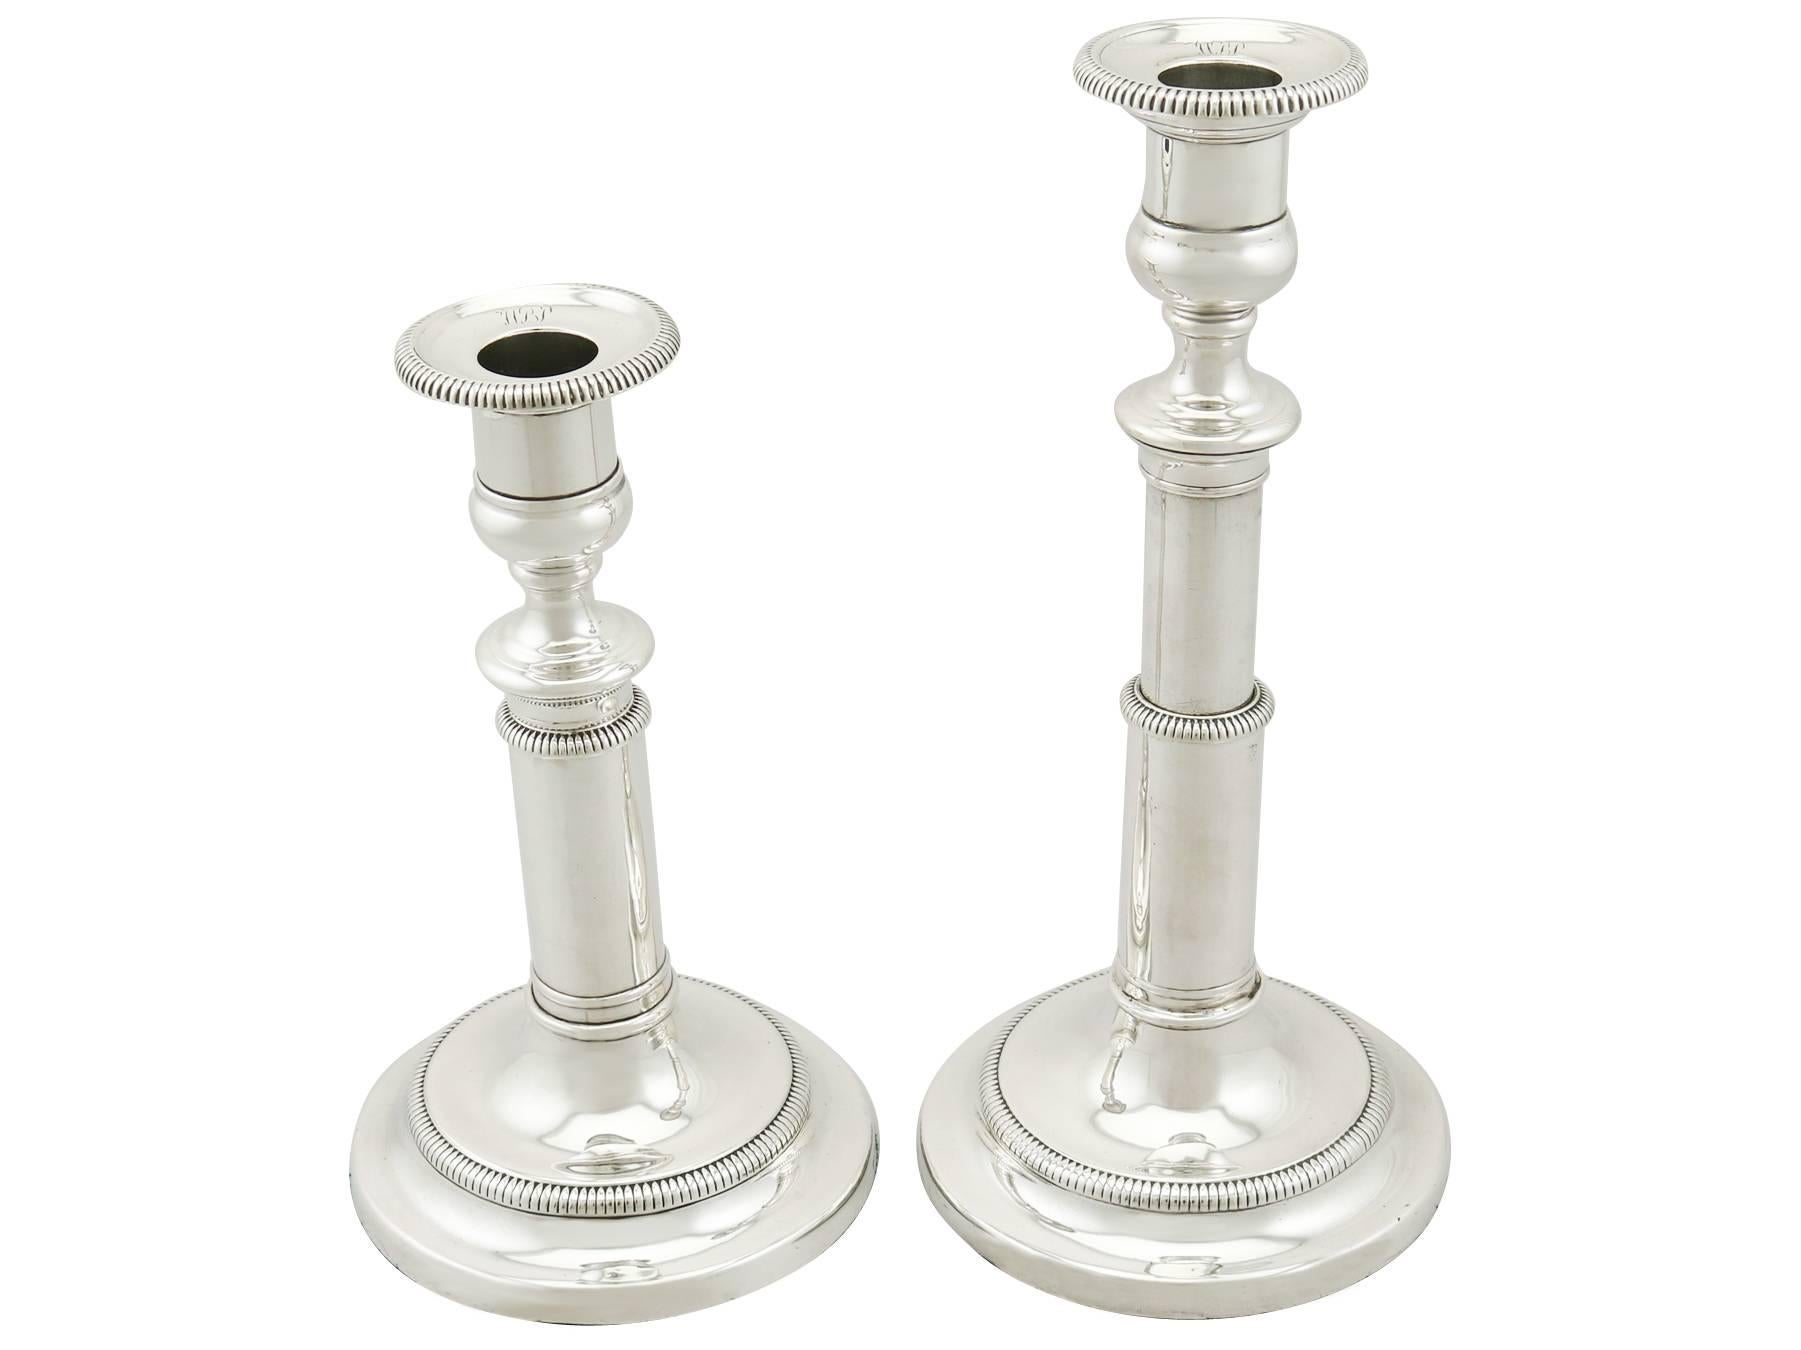 An exceptional, fine and impressive pair of antique Georgian English sterling silver telescopic candlesticks; an addition to our Sheffield silverware collection

These exceptional antique Georgian sterling silver telescopic candlesticks have a